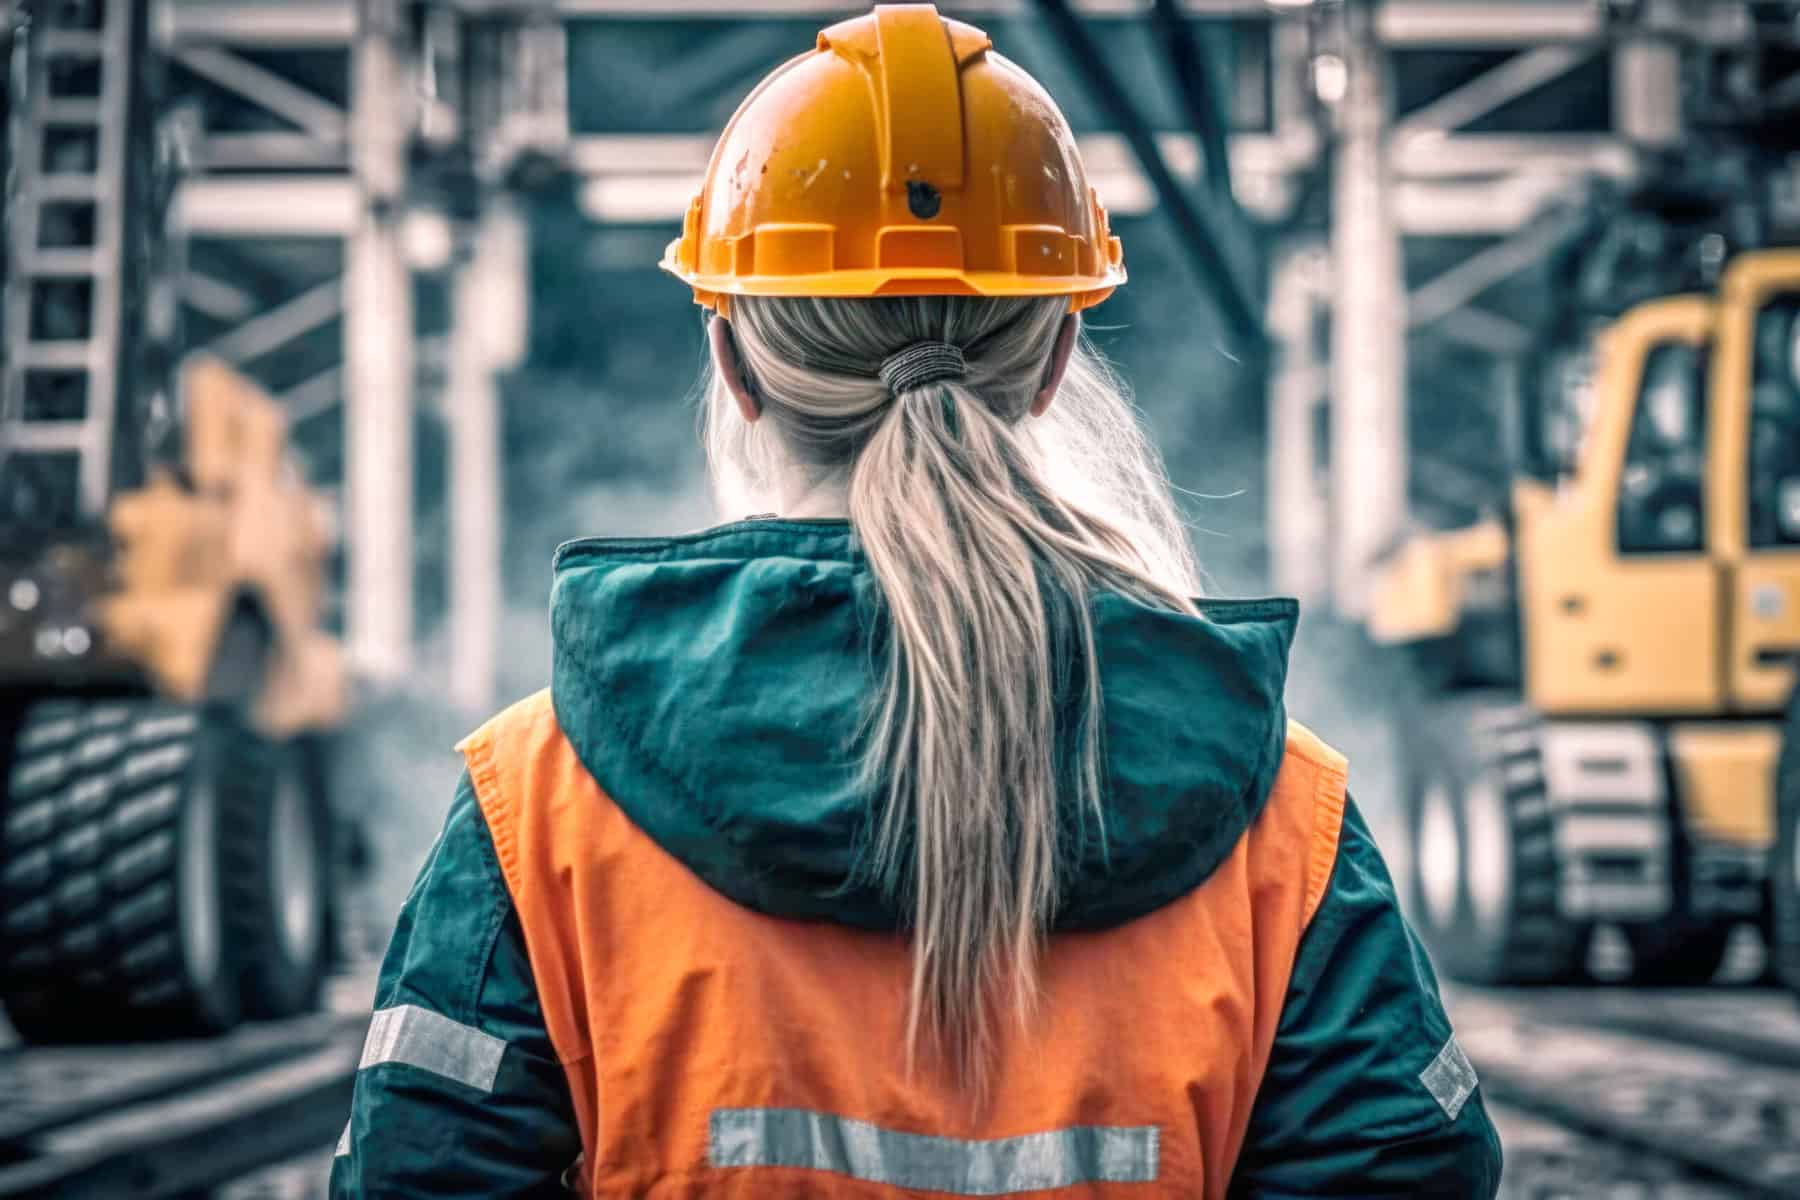 A young female worker wearing a protective helmet and safety gear on a construction site.